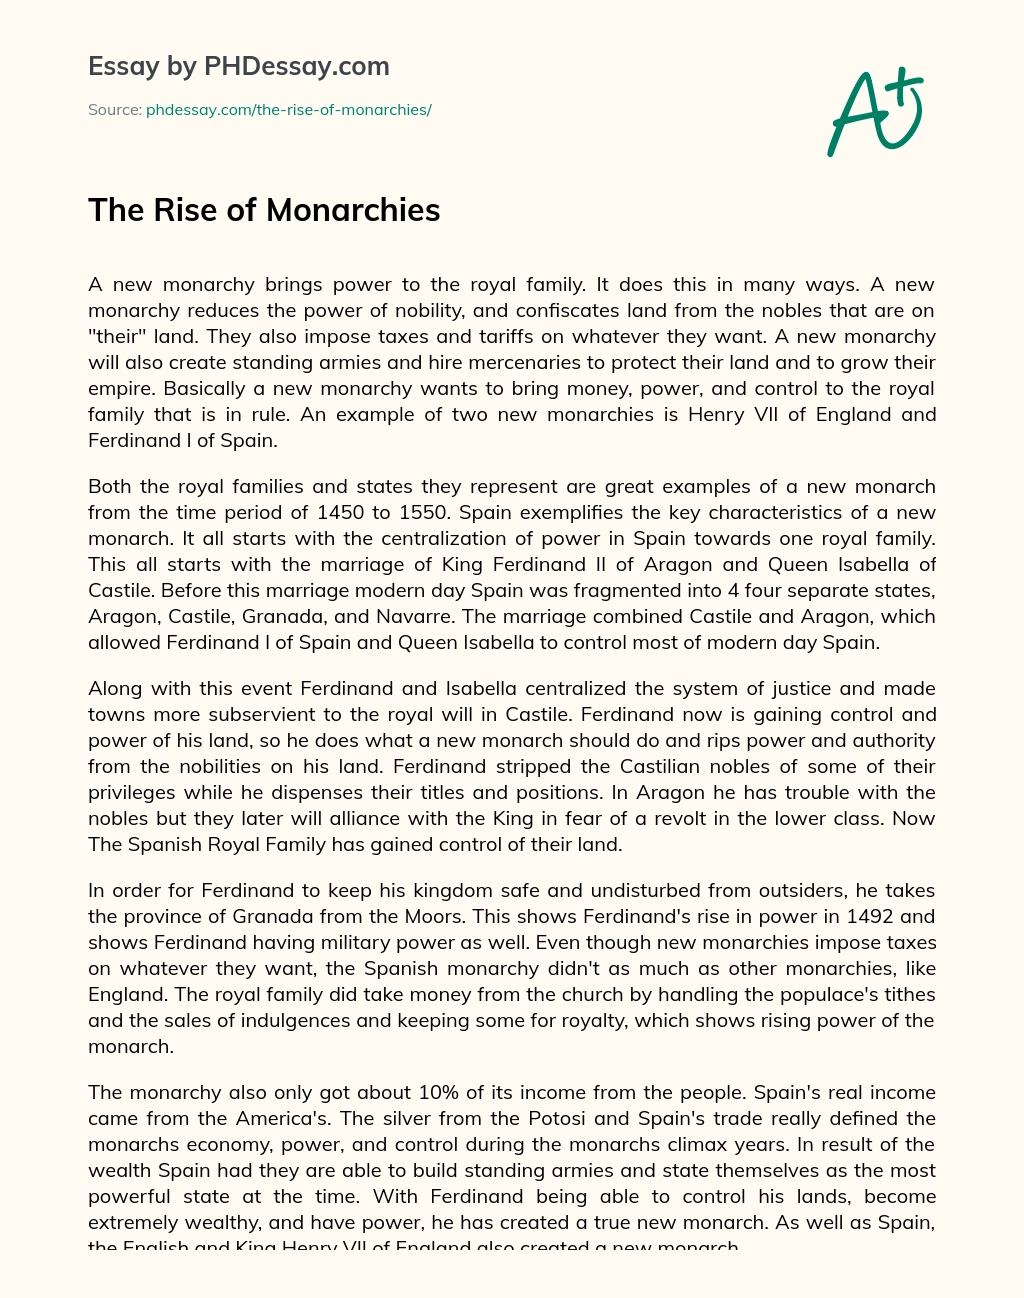 The Rise of Monarchies essay